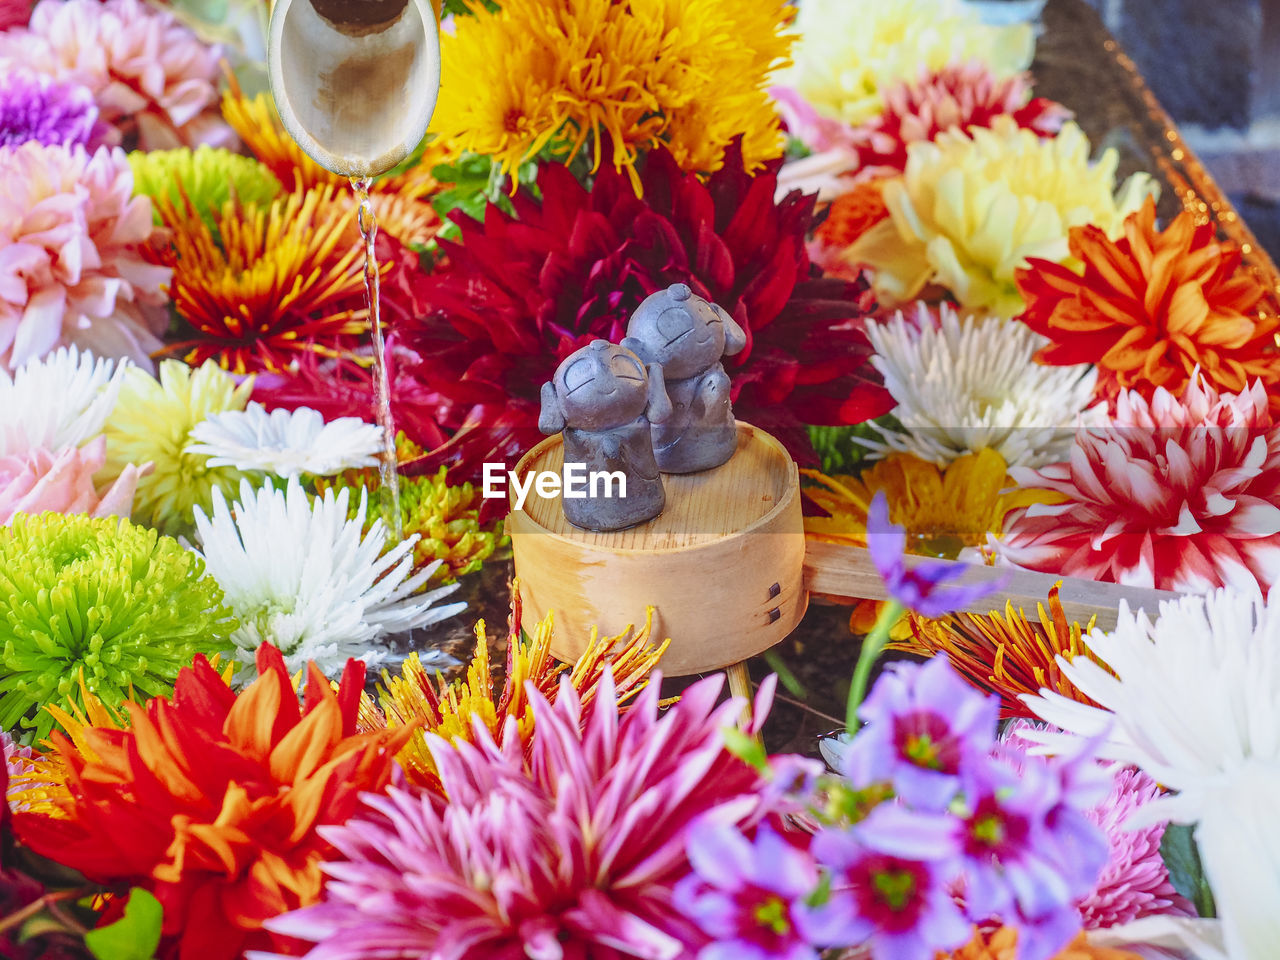 CLOSE-UP OF MULTI COLORED FLOWERS ON TABLE